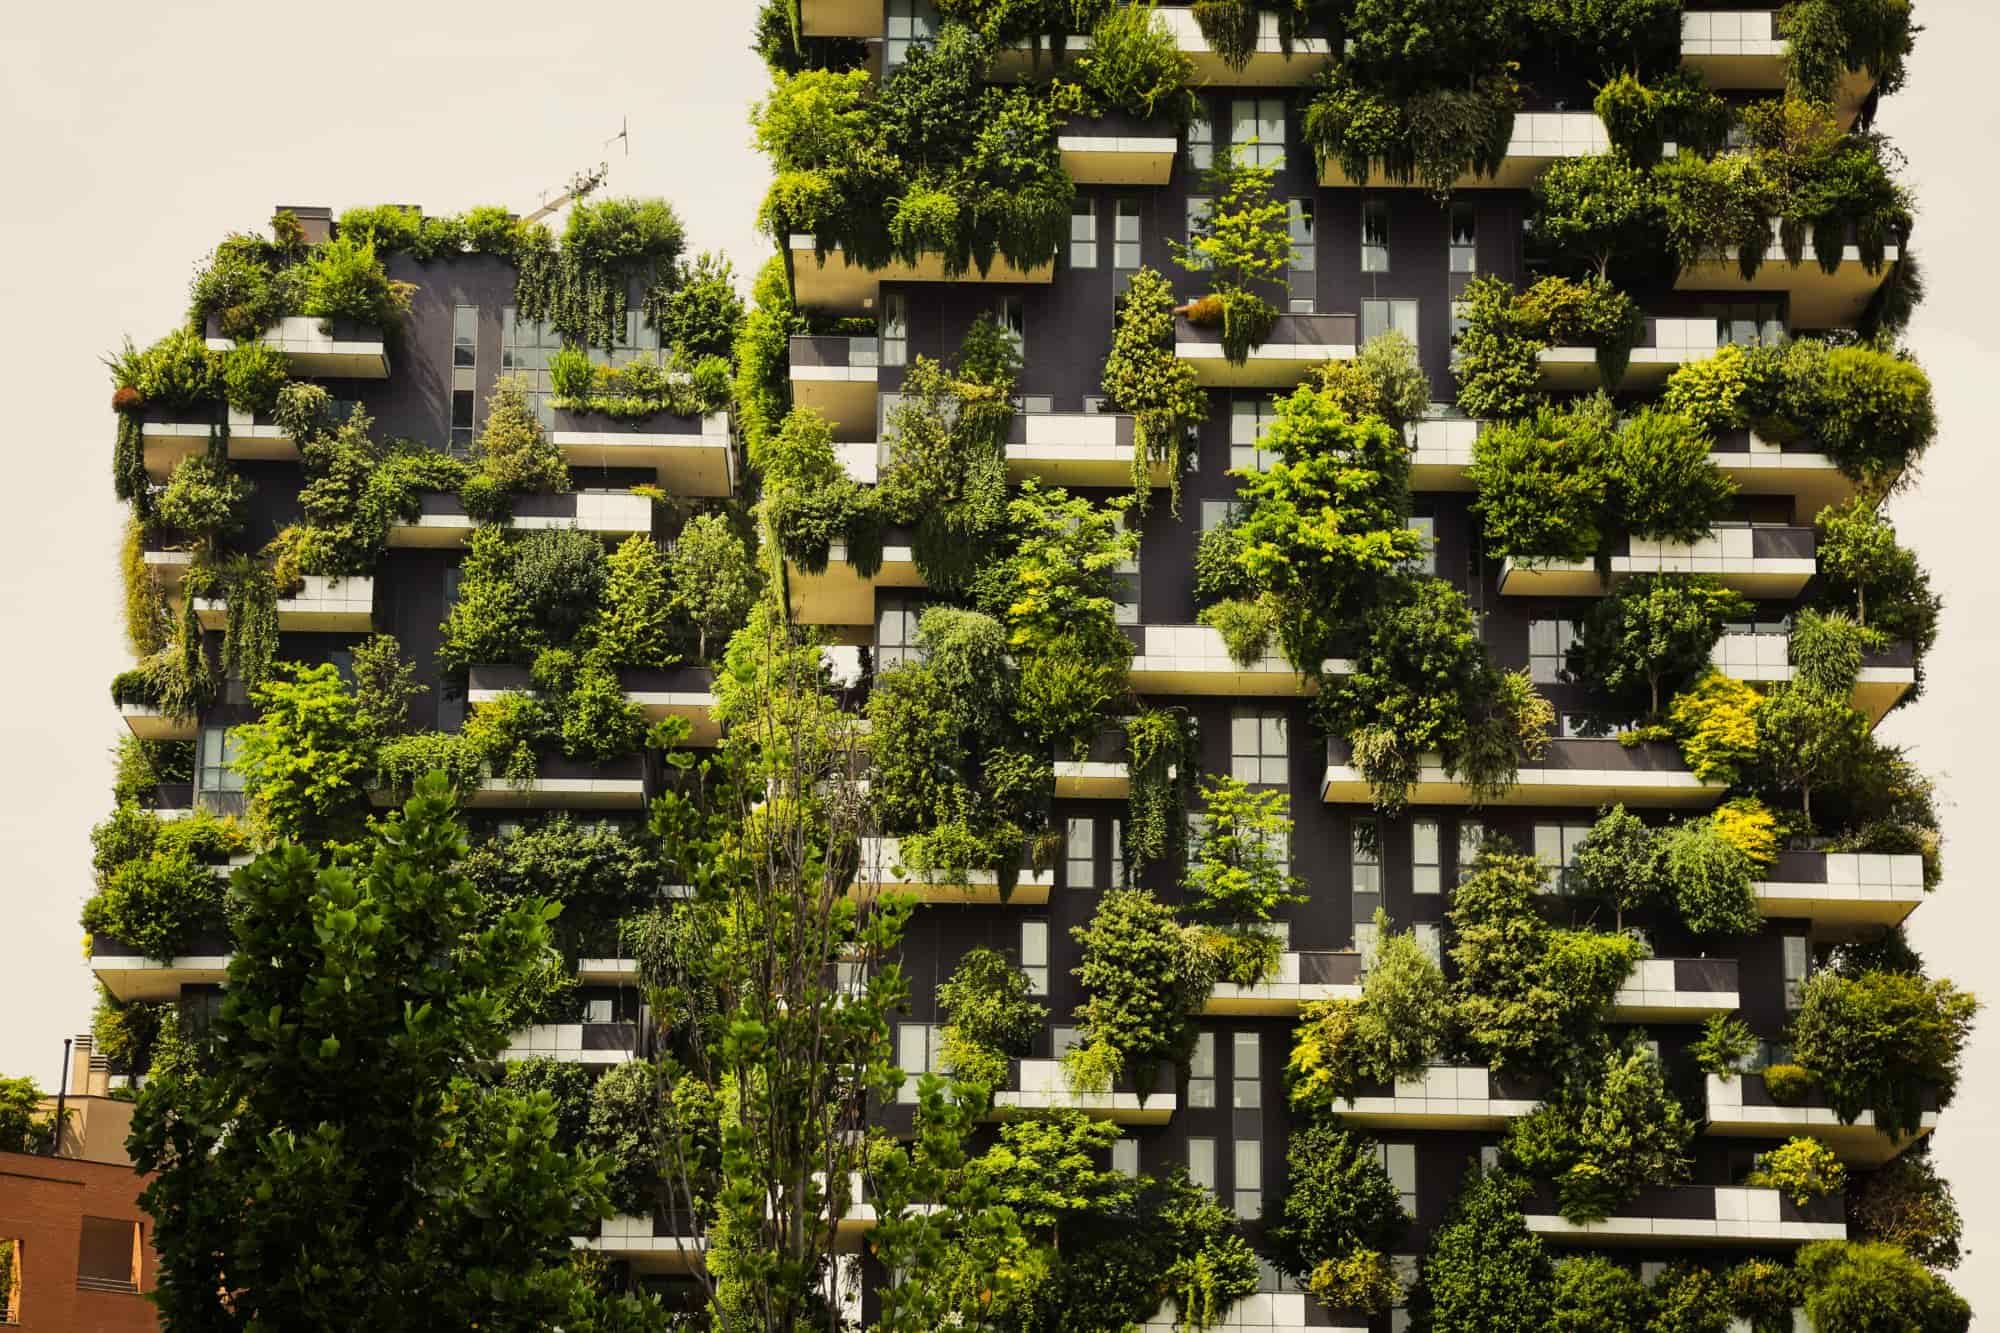 Sustainable Architecture: Everything you need to know